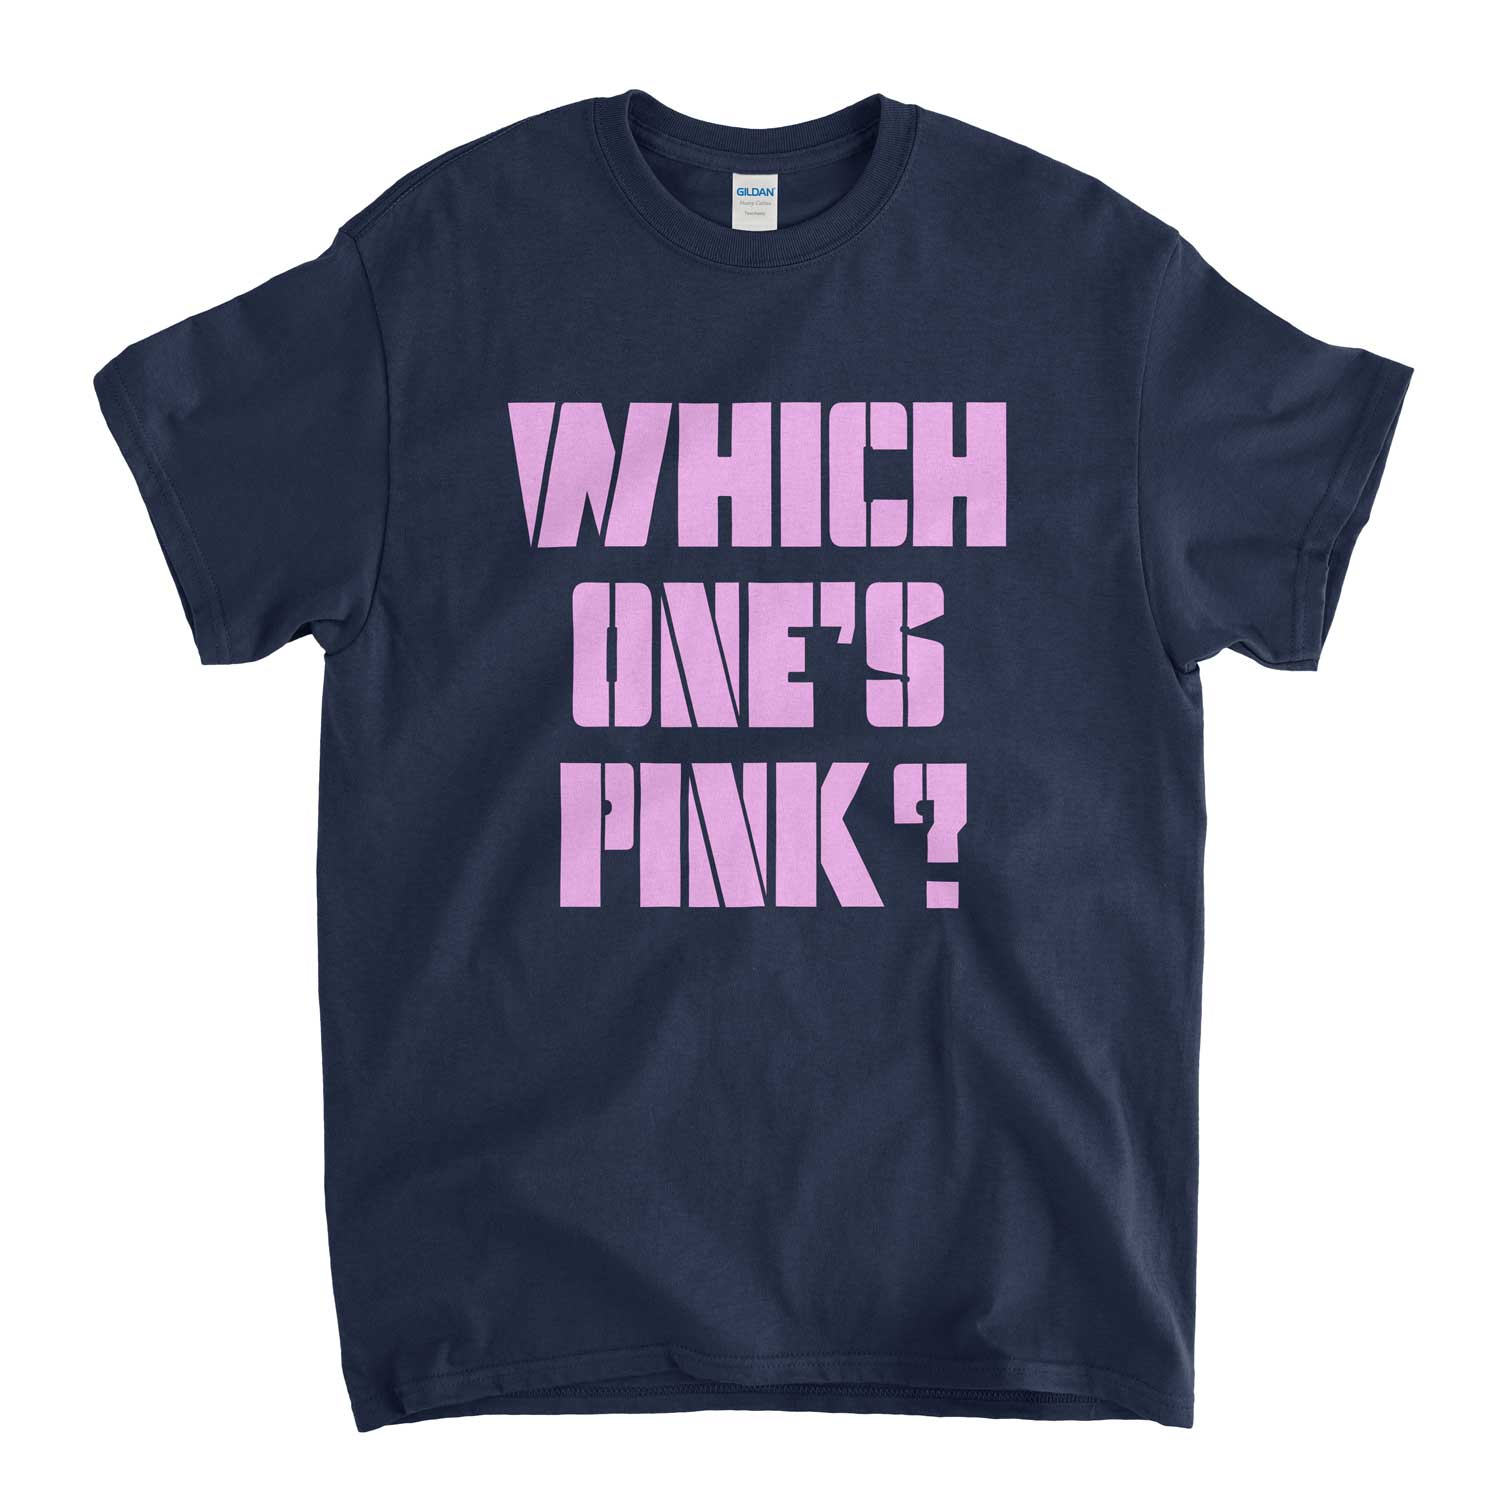 Which One's Pink T Shirt - An Old Skool Hooligans Prog Rock Inspired Design